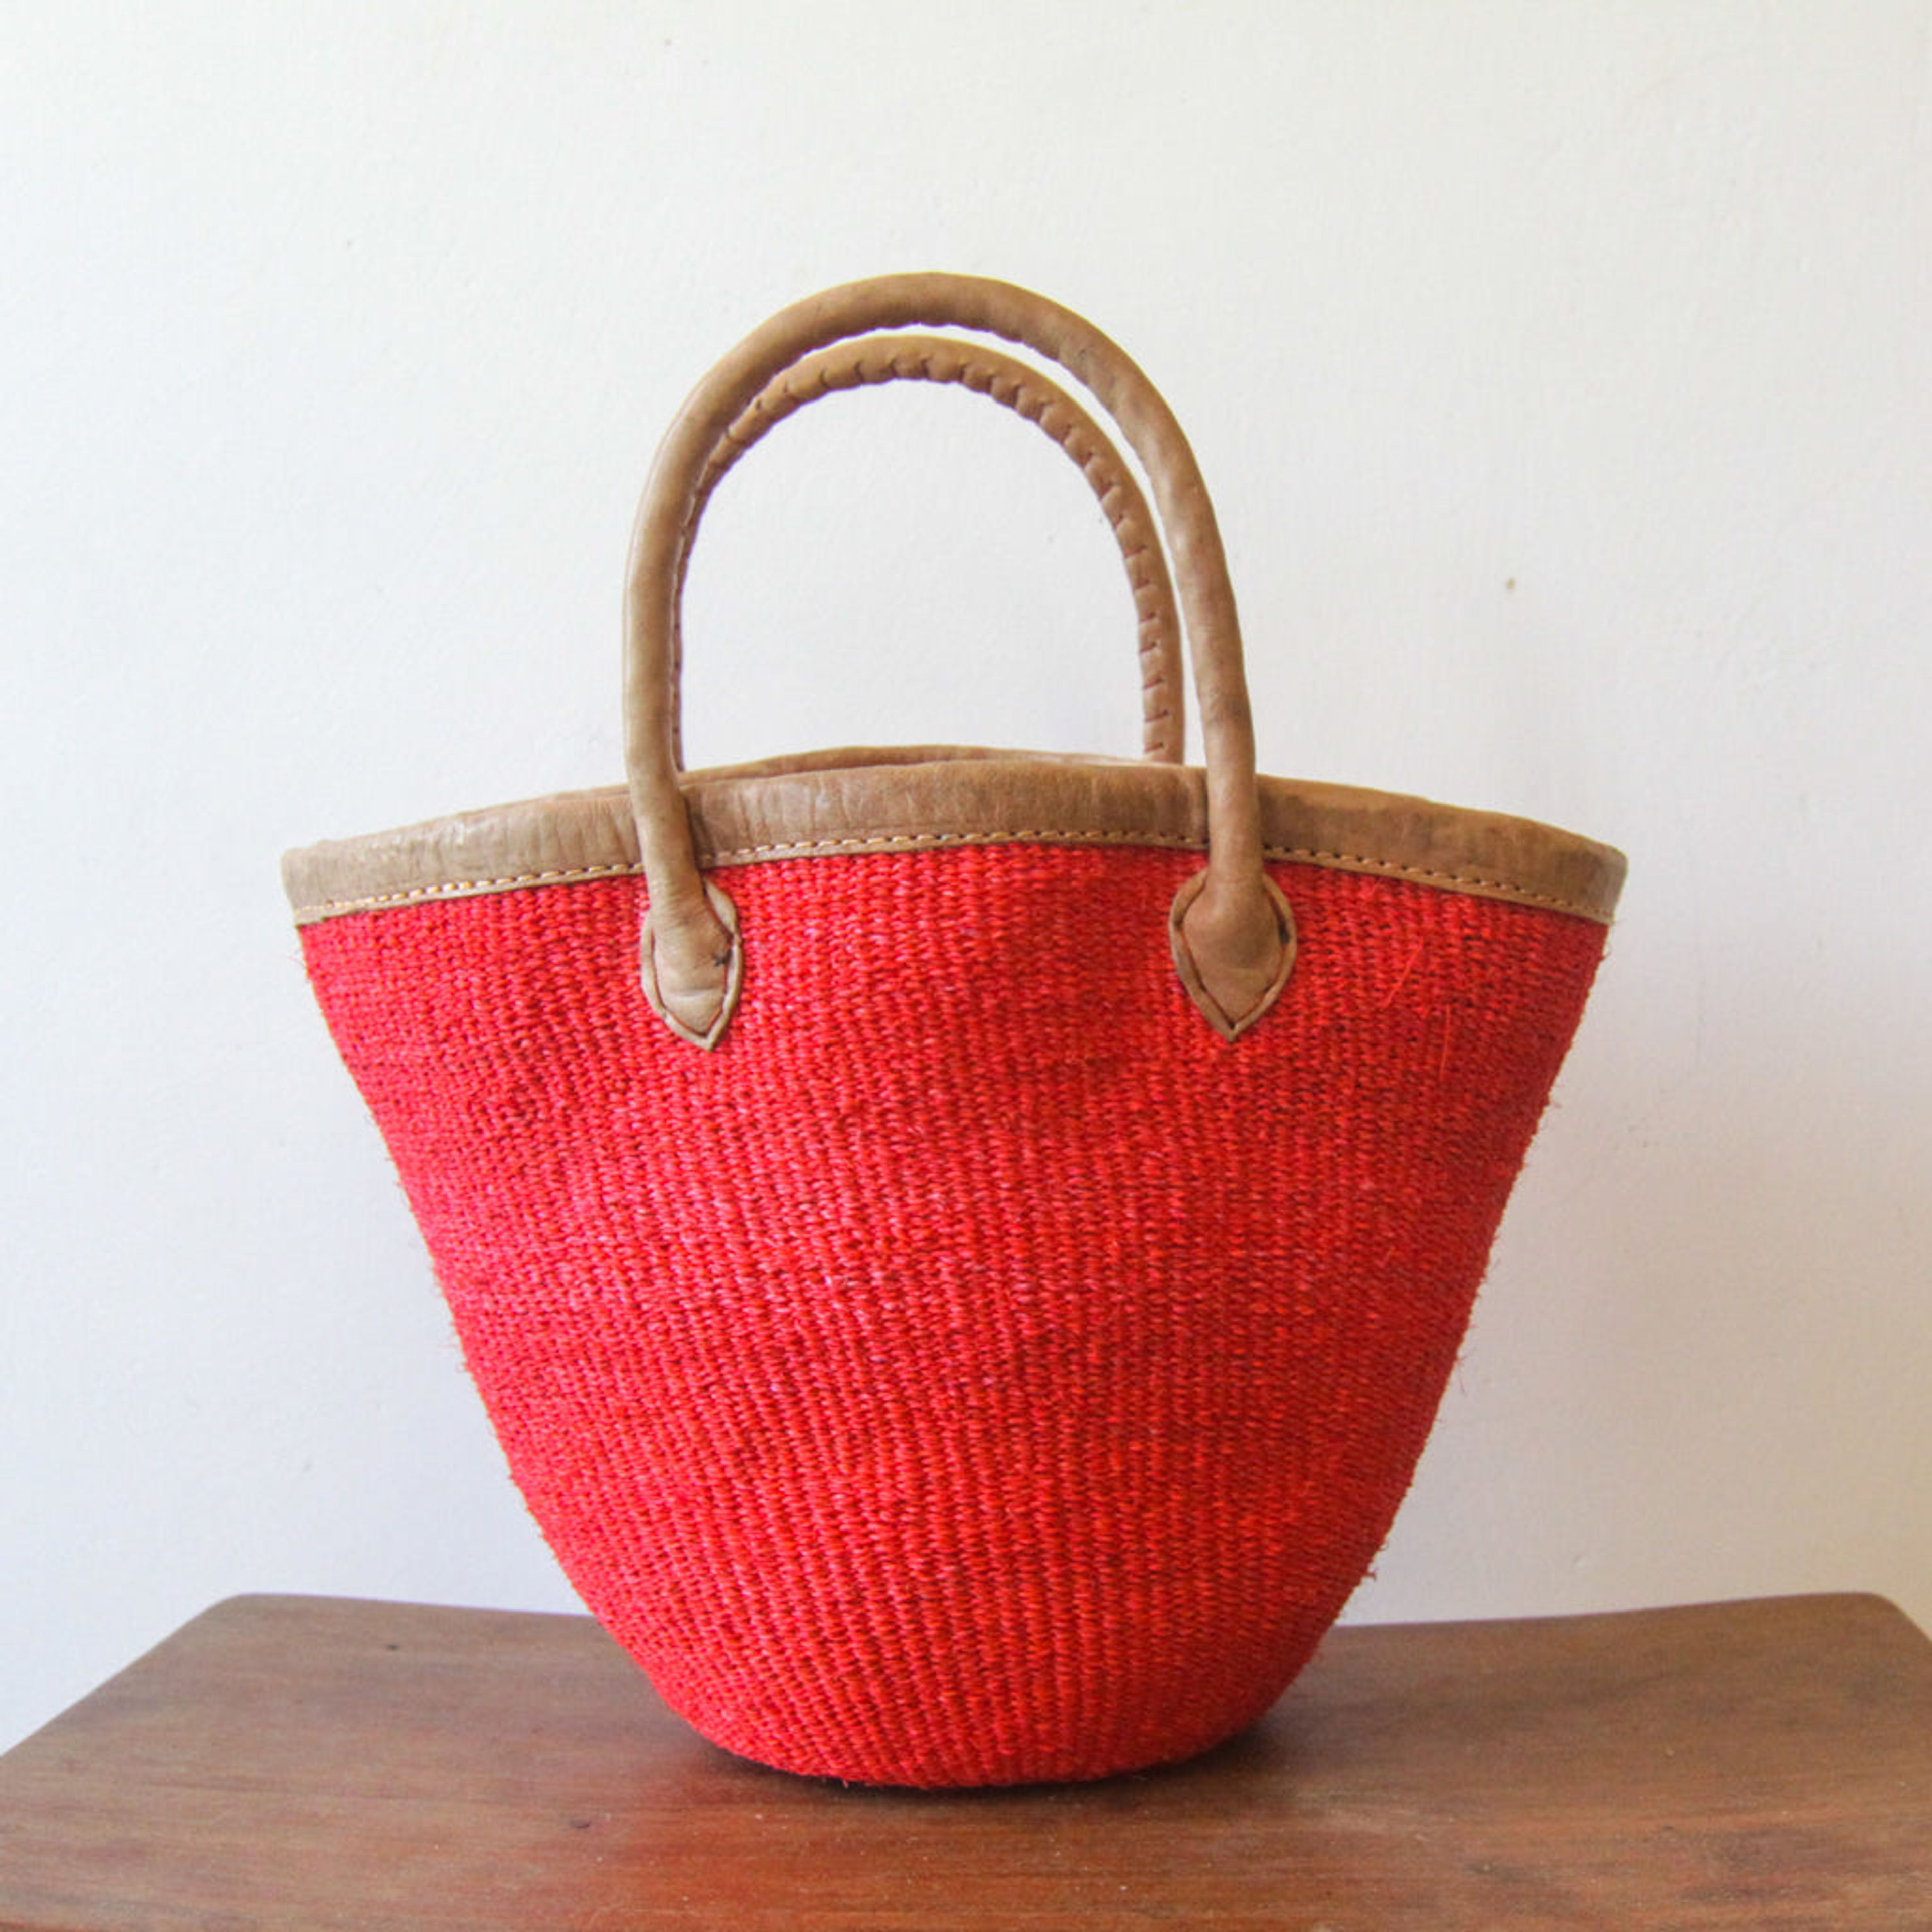 Baby darling . basket bag . leather . sisal . fineweave . one-of-a-kind . 107